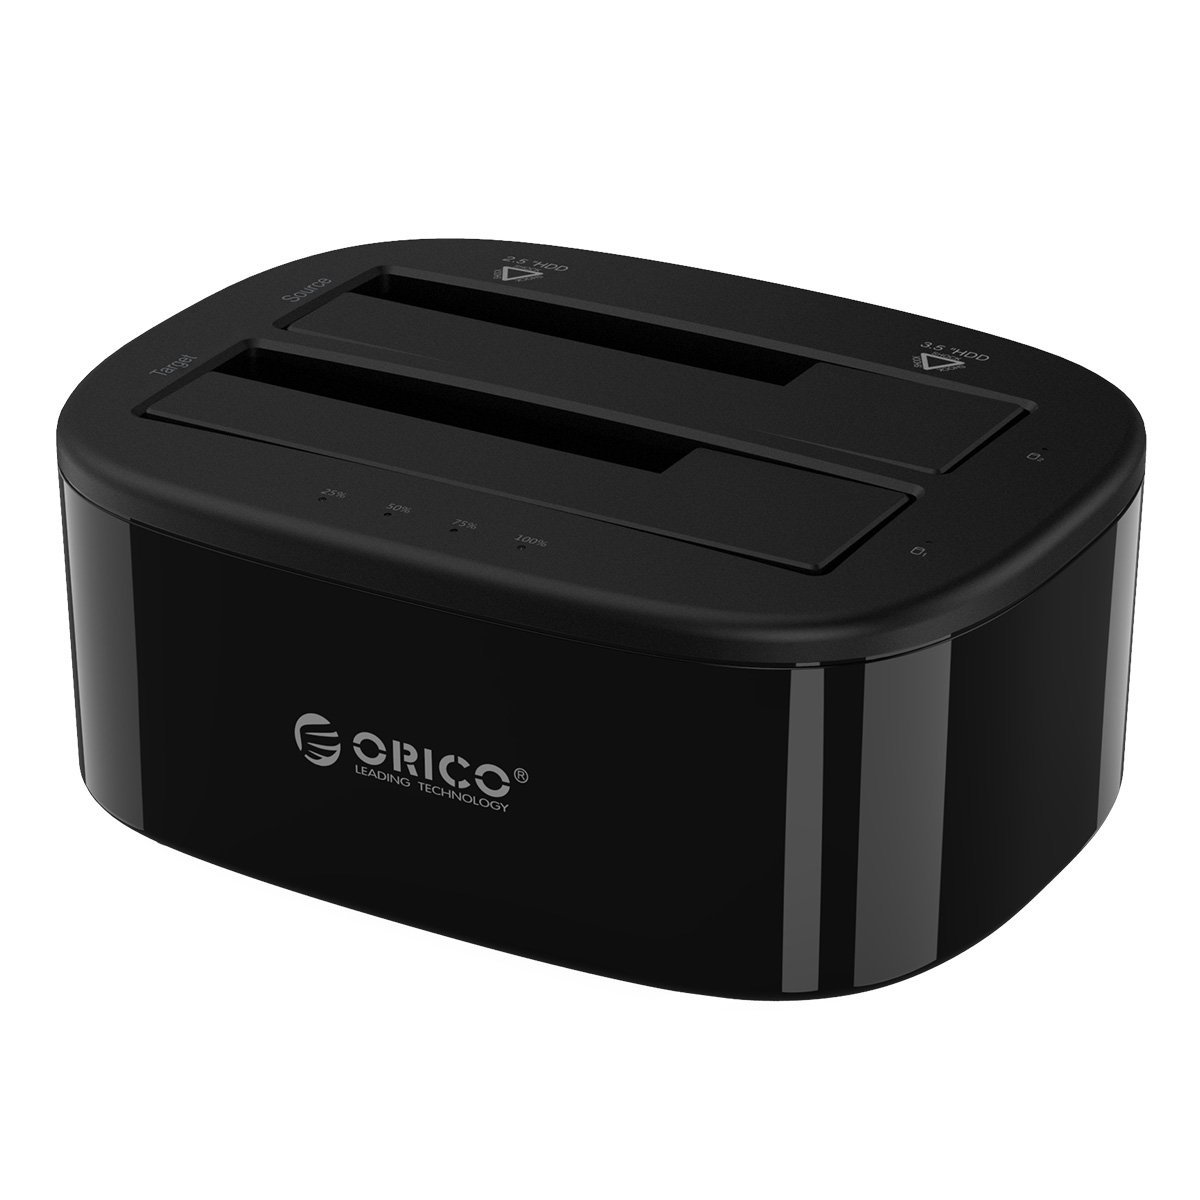 ORICO Dual-Bay Hard Drive Docking Station for 2/5 / 3/5 inch SATA HDD/SSD with Offline Clone Function